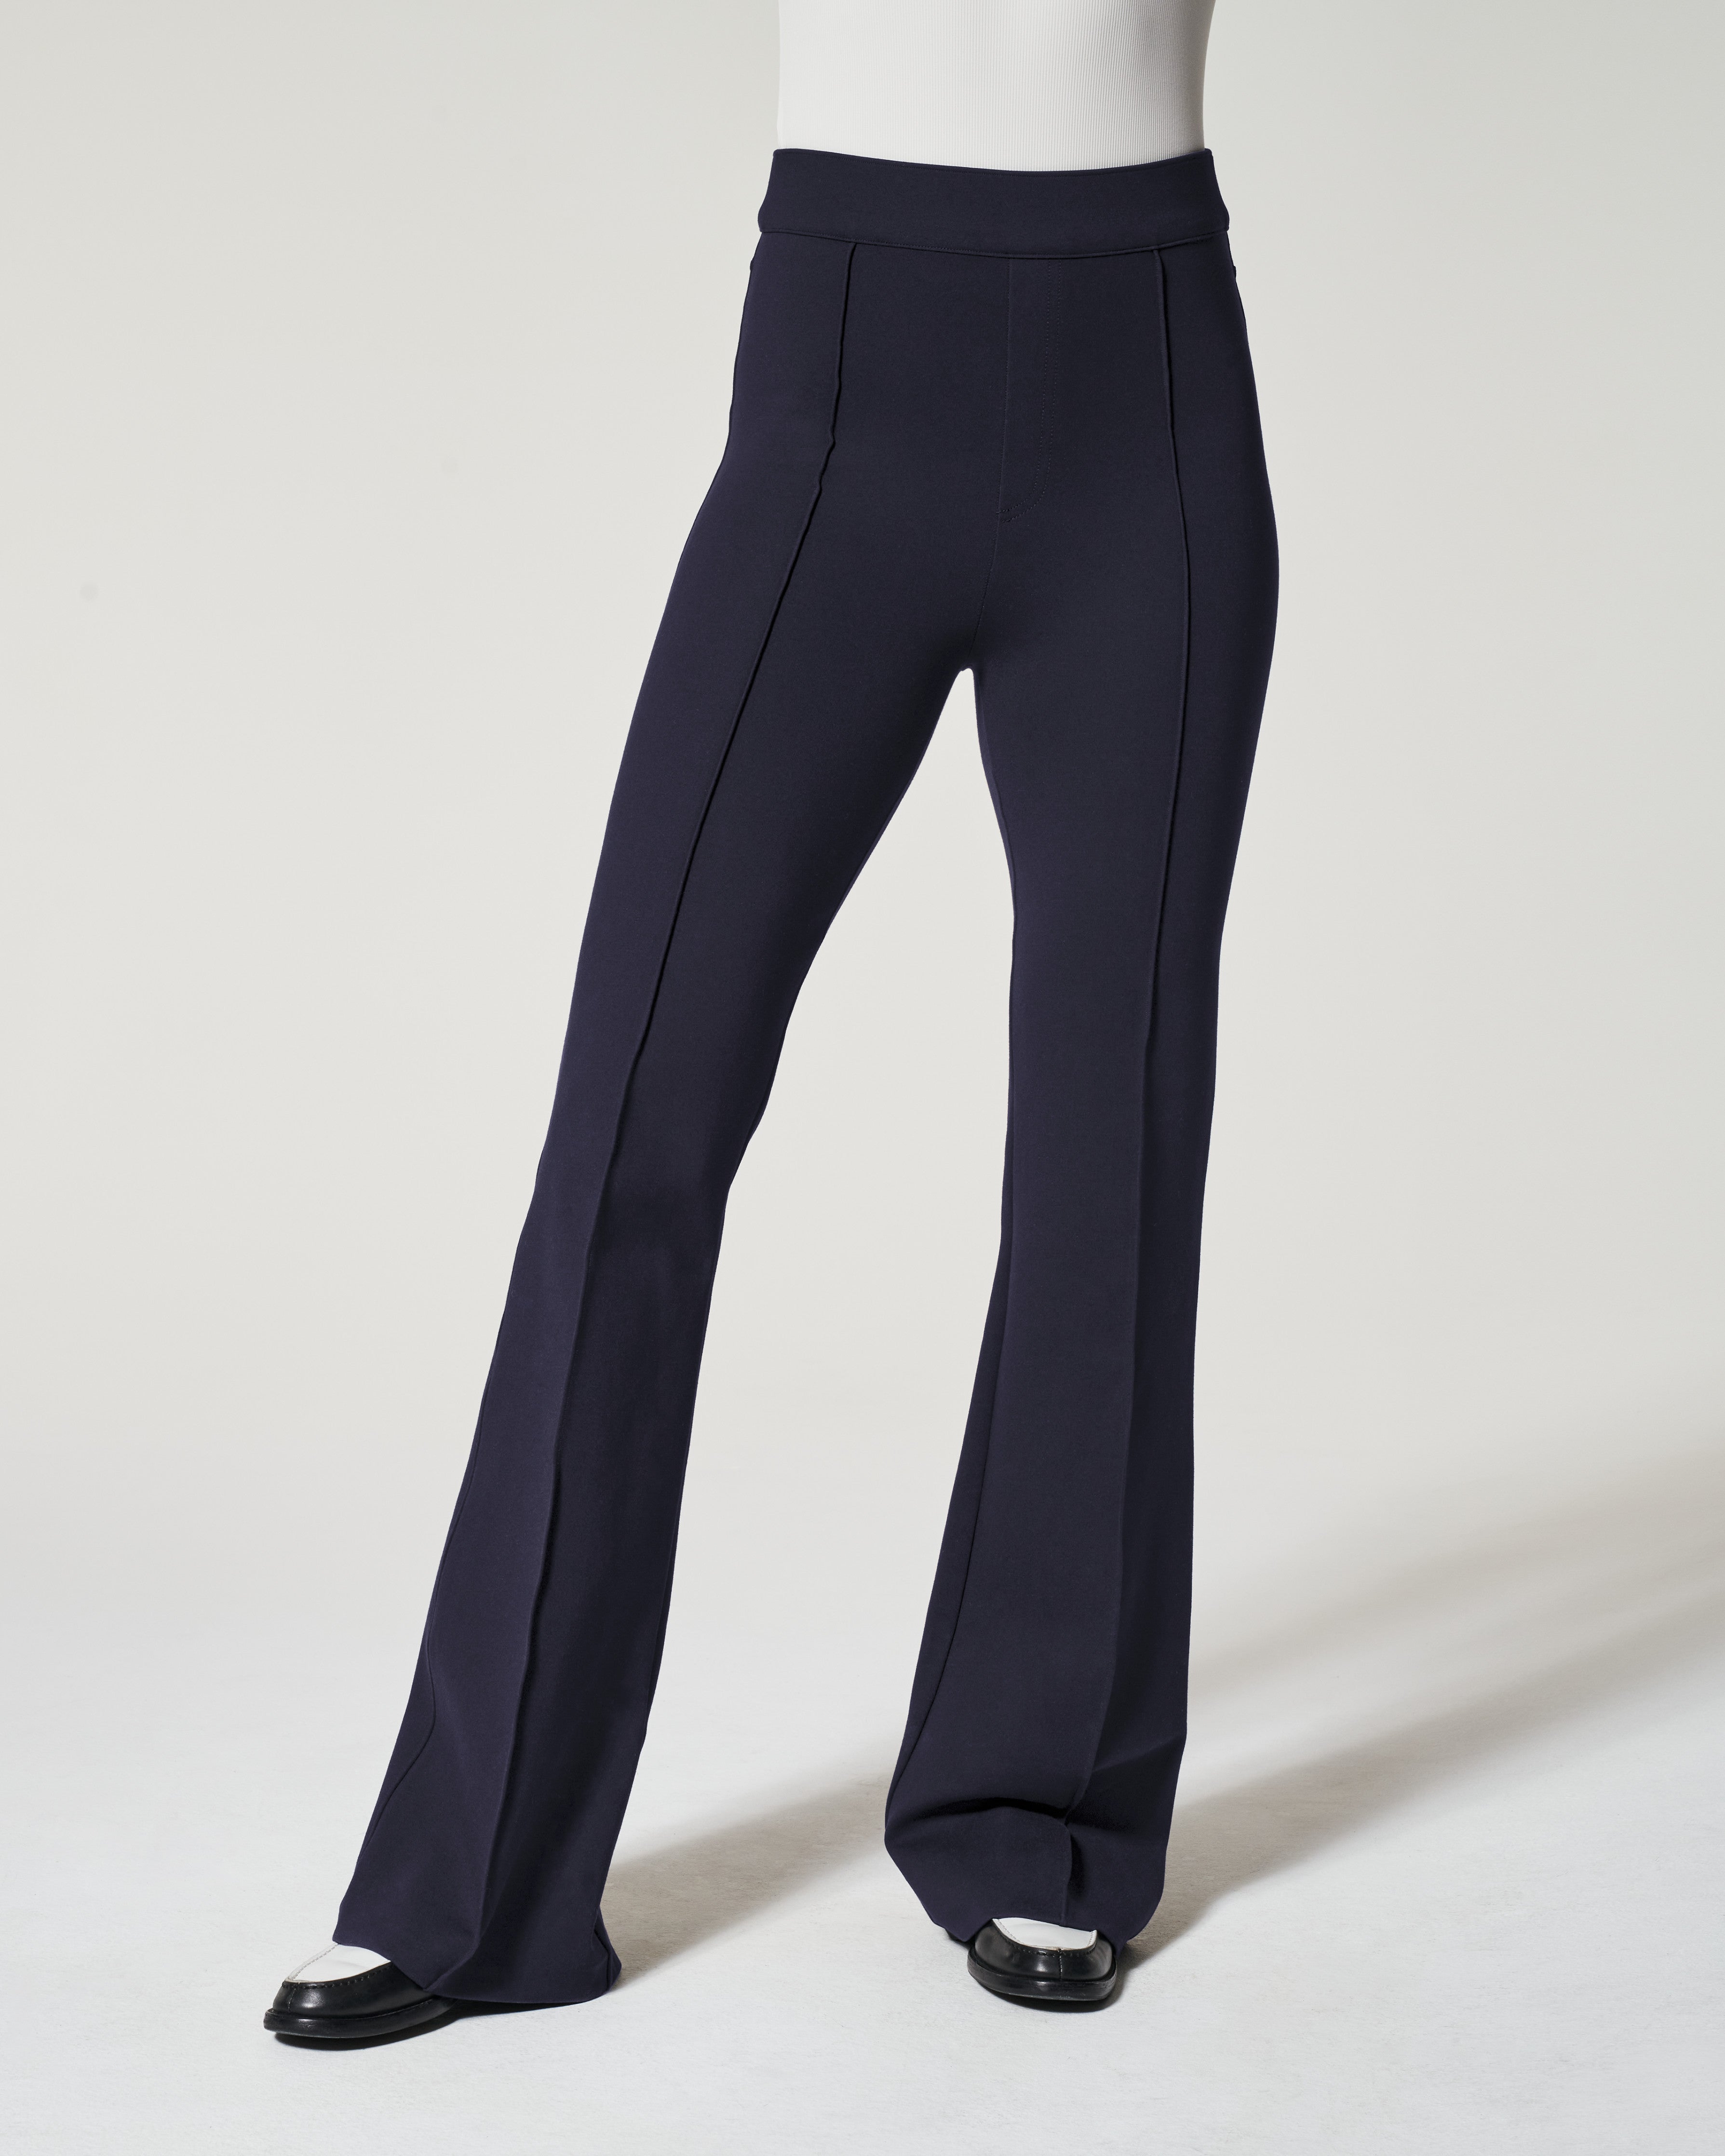 SPANX - Heading back to the office? We've got your butt covered with the  Perfect Pant, Hi-Rise Flare! These Perfect Pants flatter your legs and are  buttery-soft, so you can look great